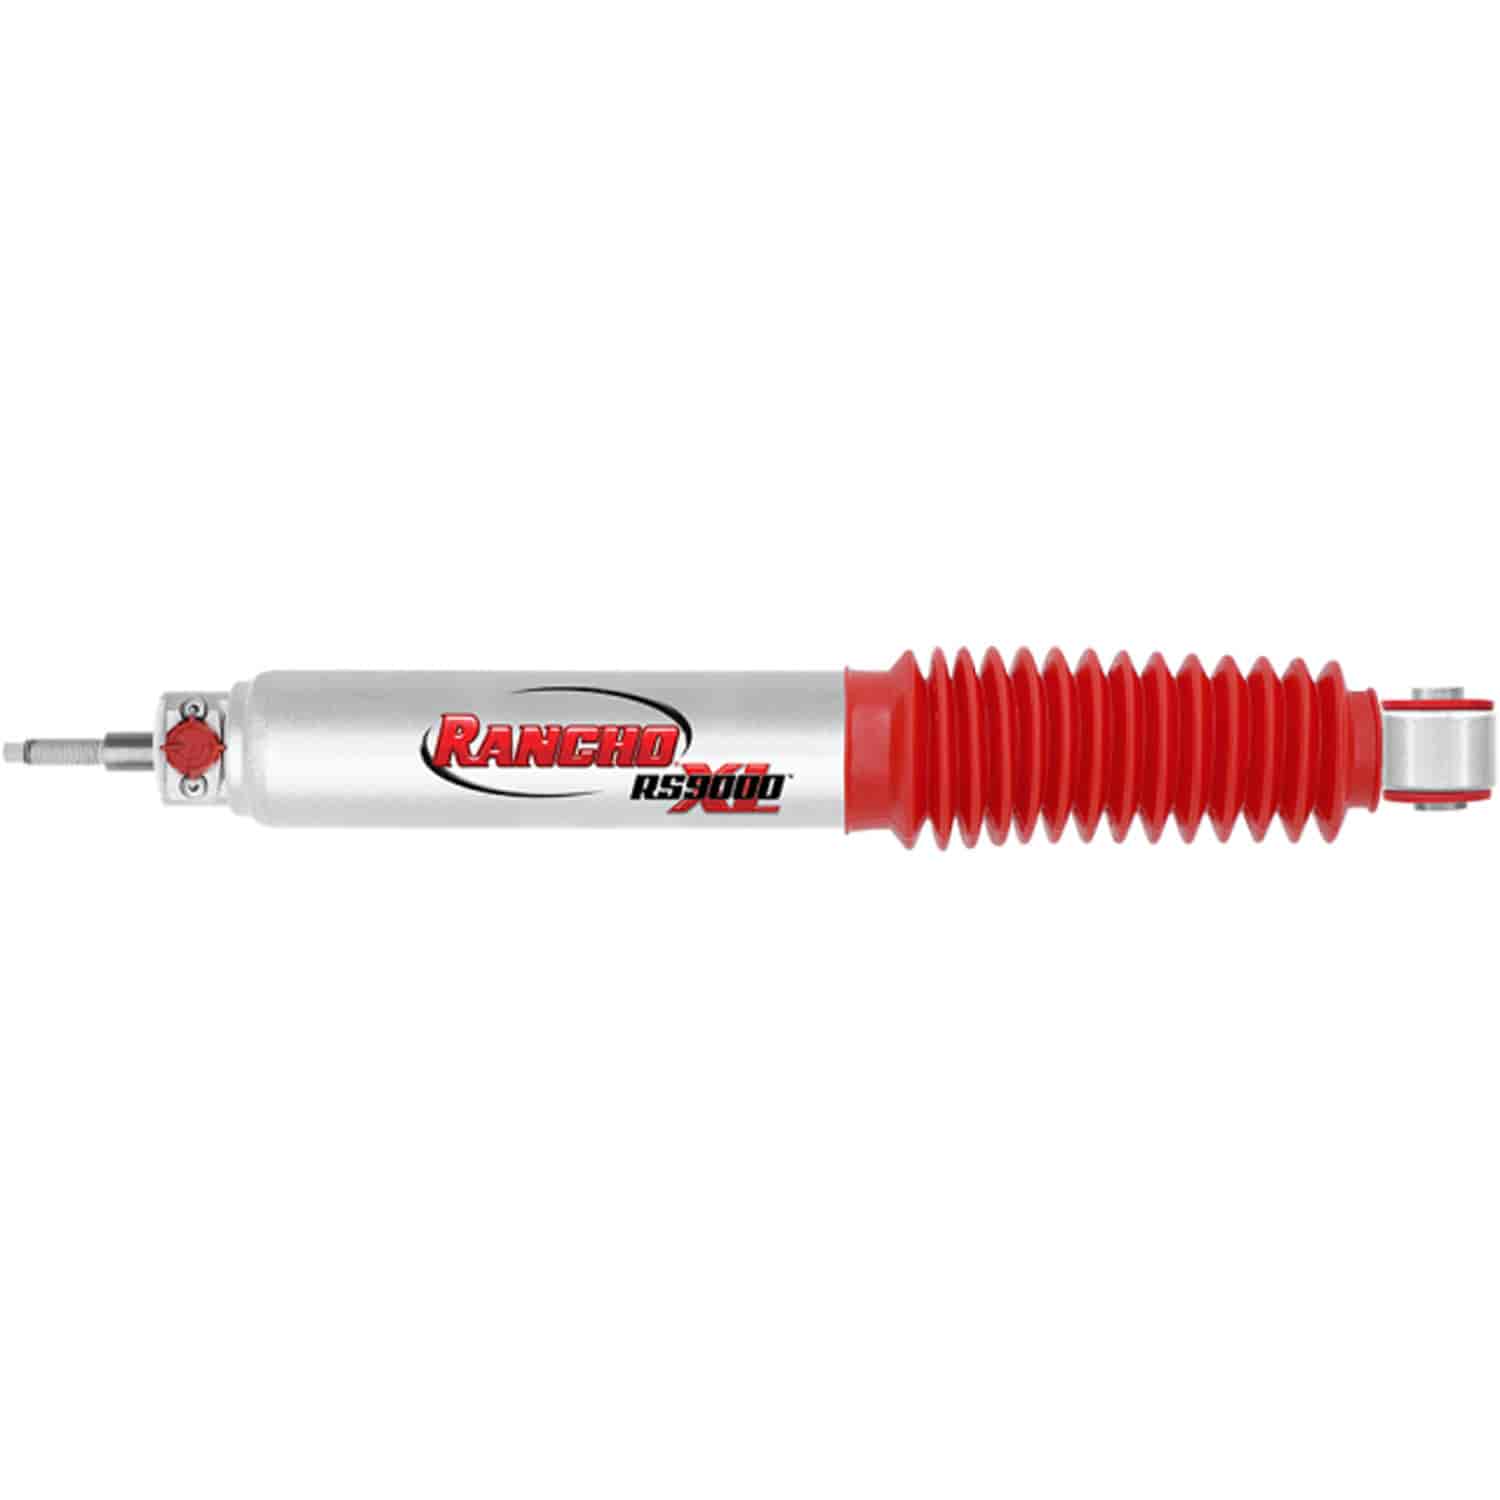 RS9000XL Rear Shock Absorber Fits Land Rover Range